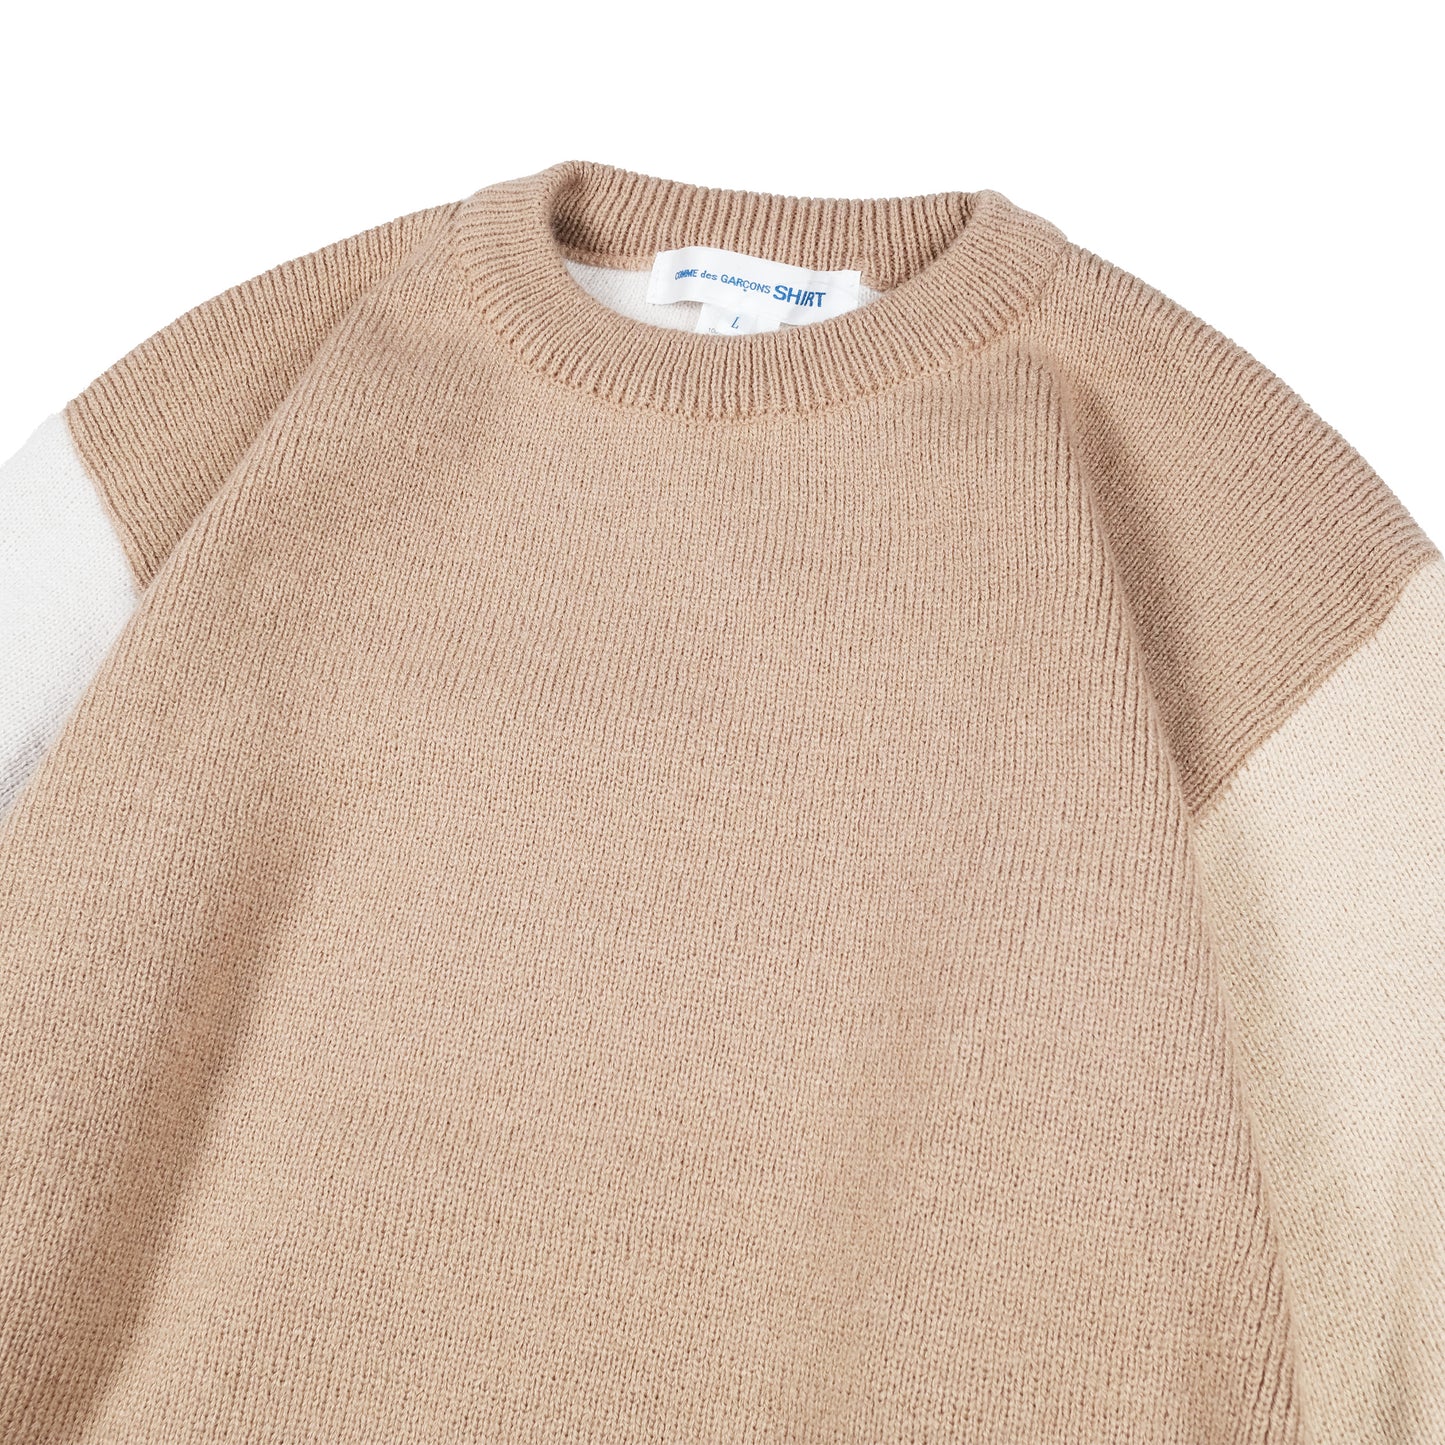 CDG SHIRT Contrasted Brown Knit Sweater